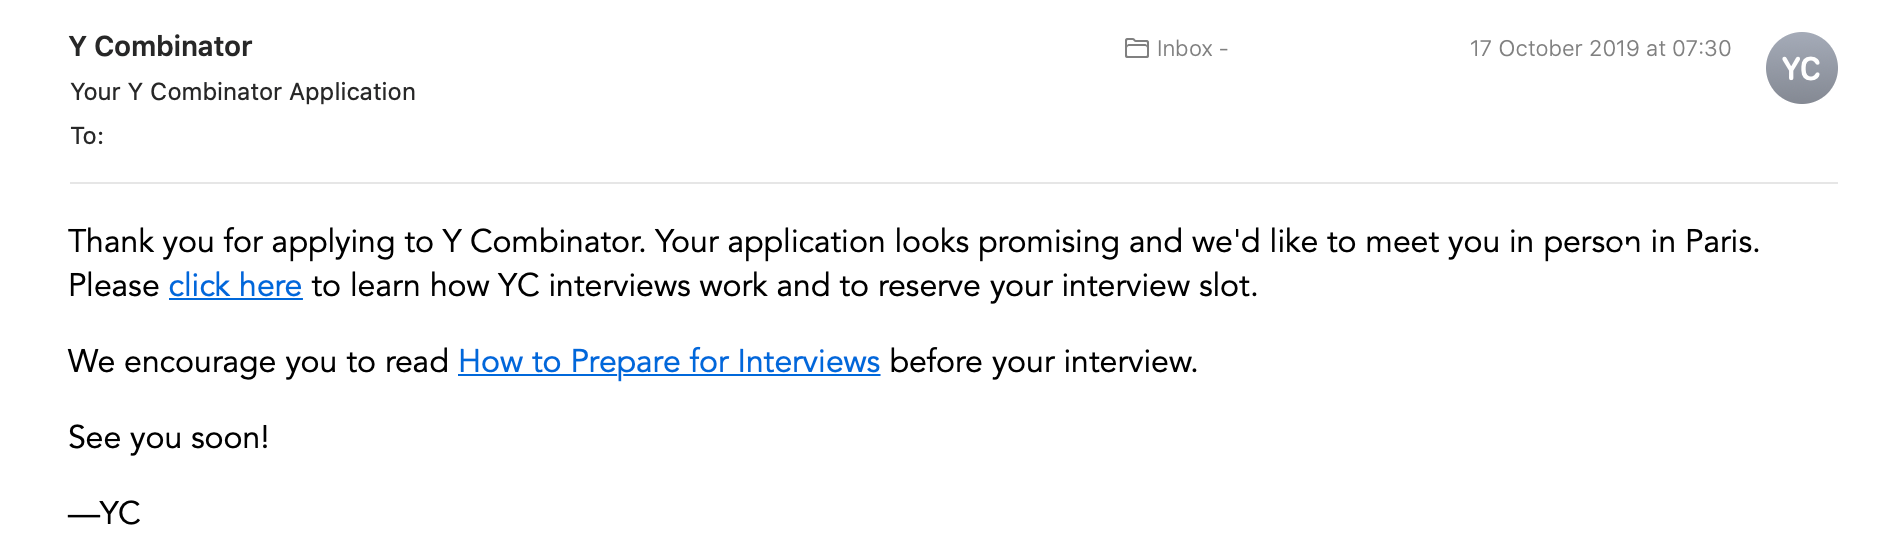 Invitation to the interview.